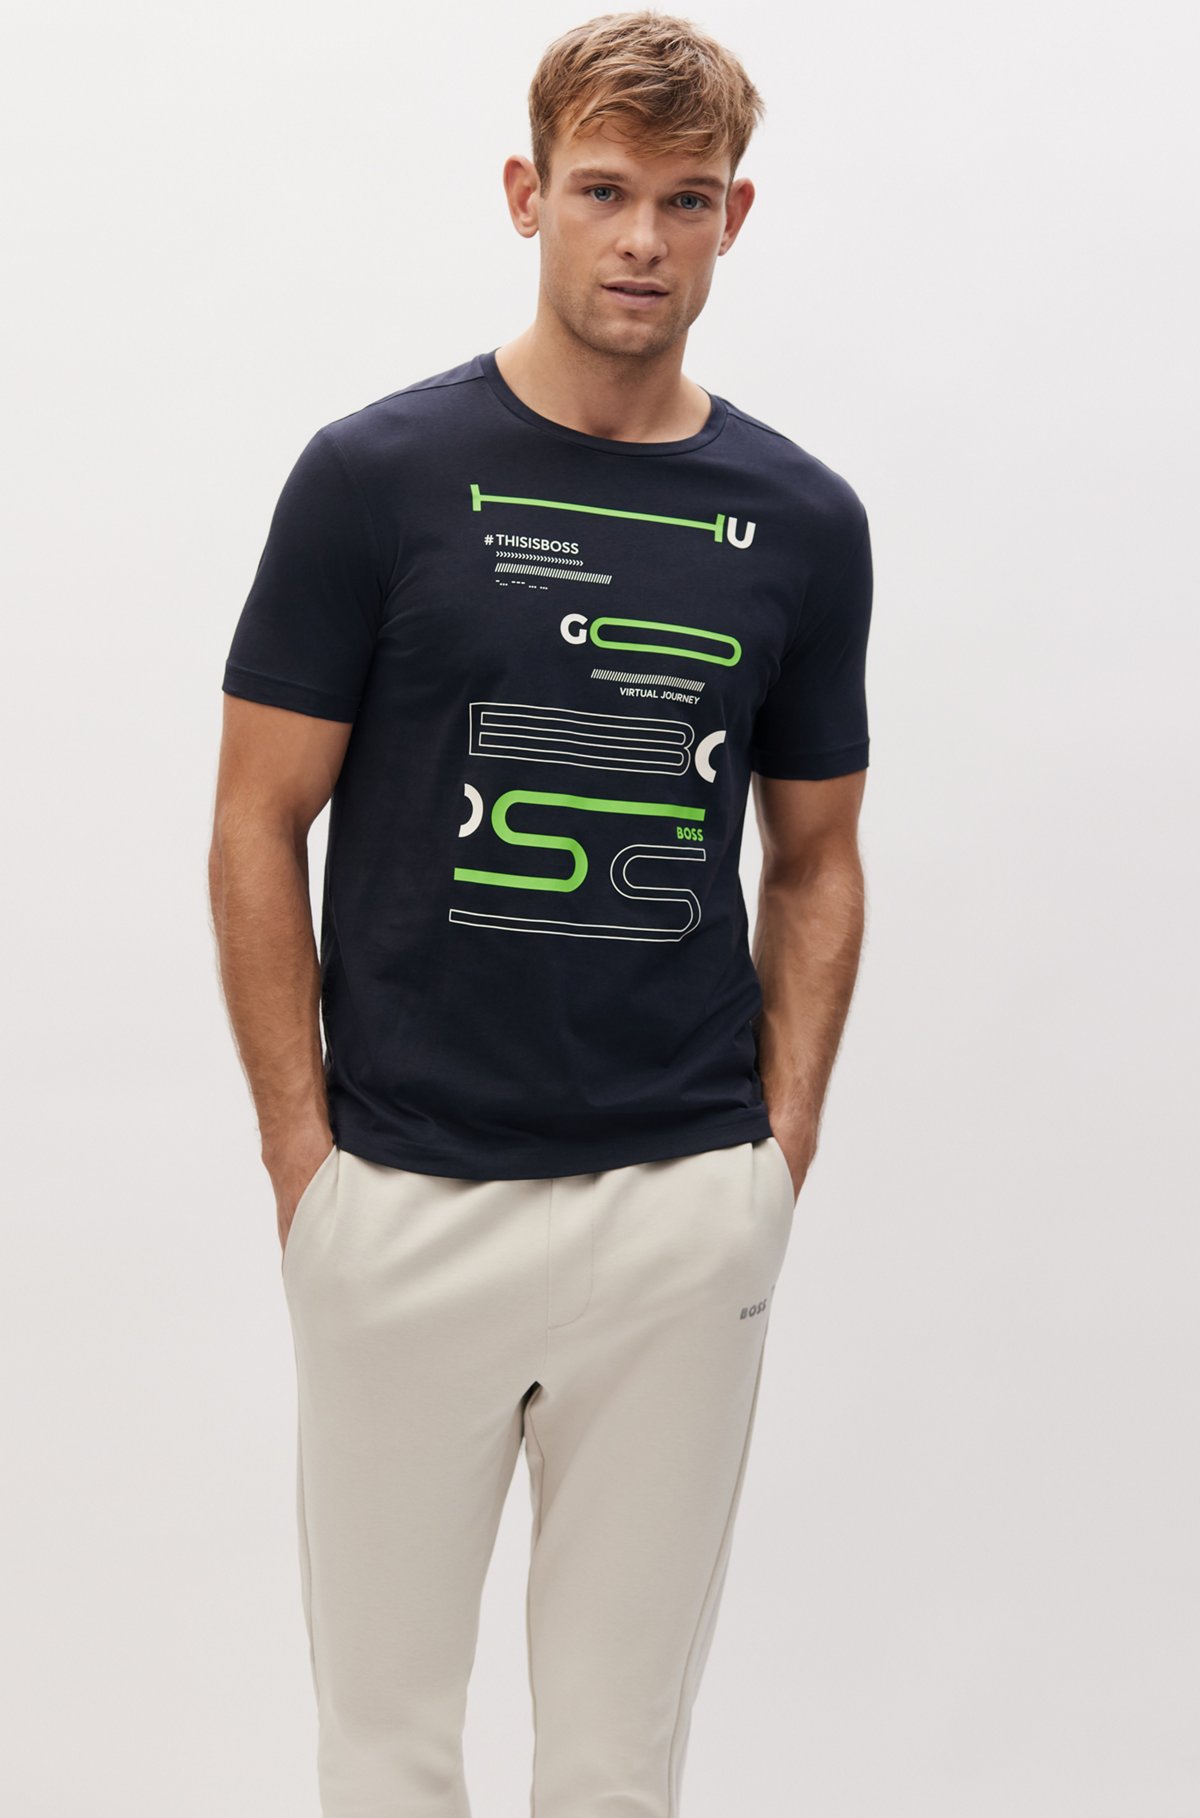 BOSS - Two-pack of cotton T-shirts with logo artwork